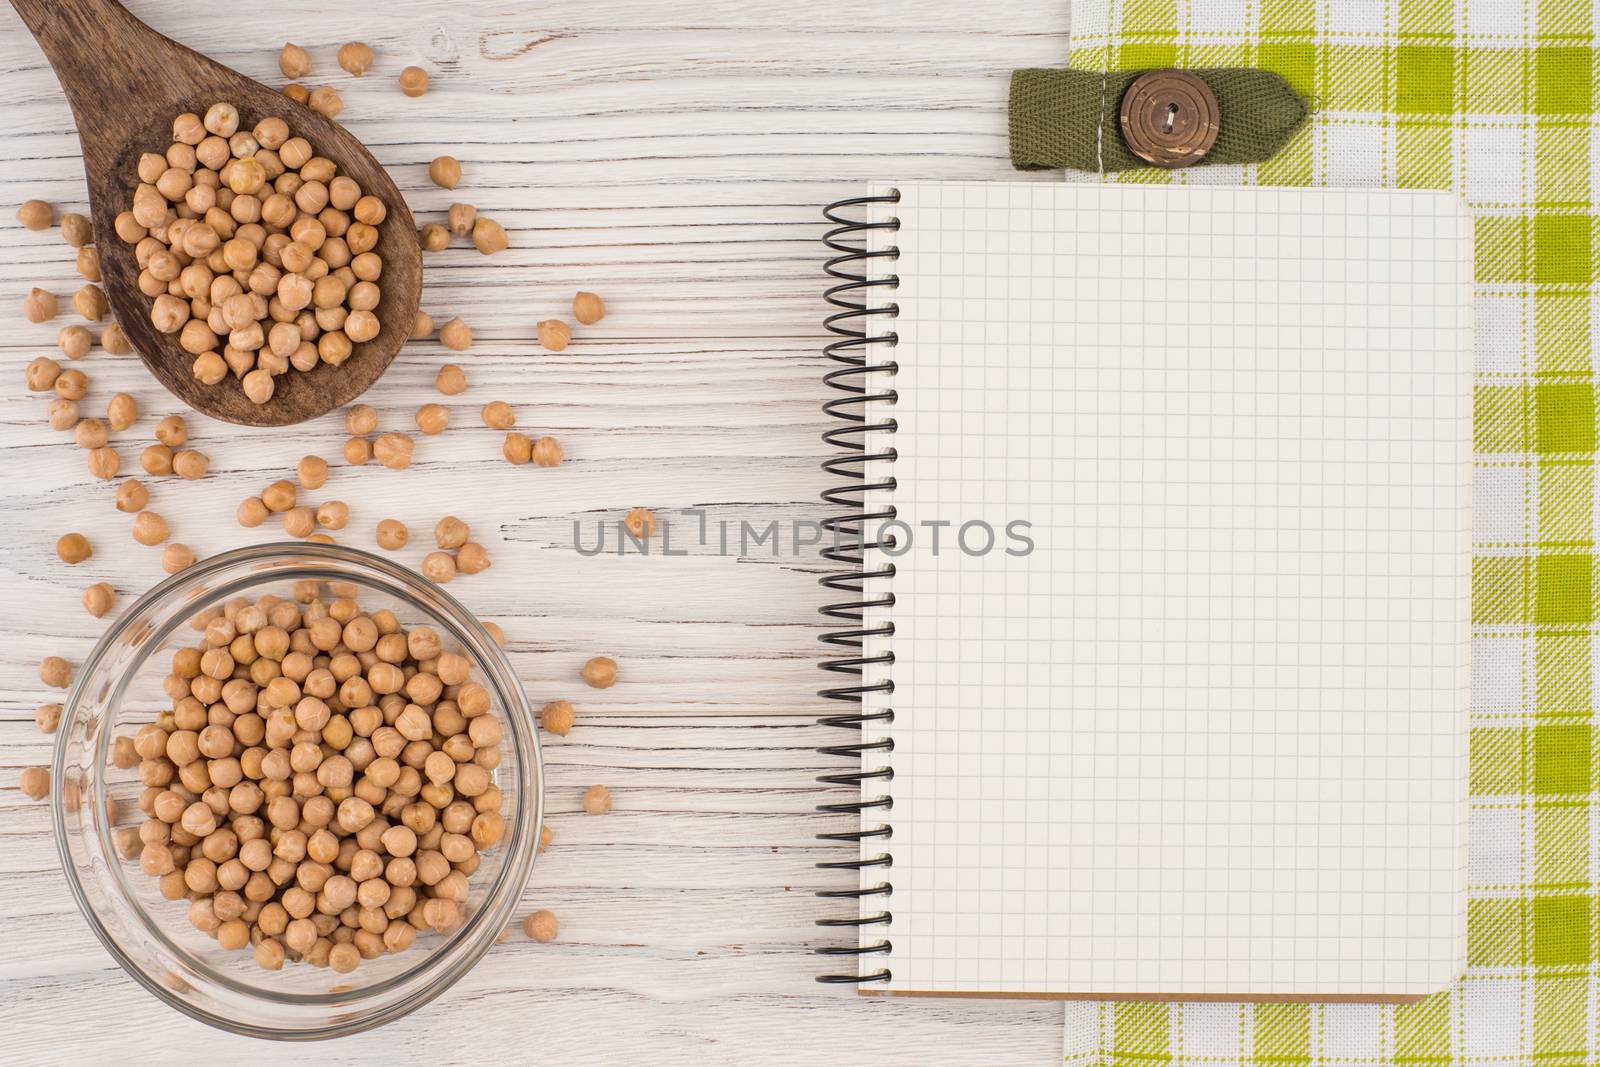 Chickpeas on old wooden table.  by DGolbay